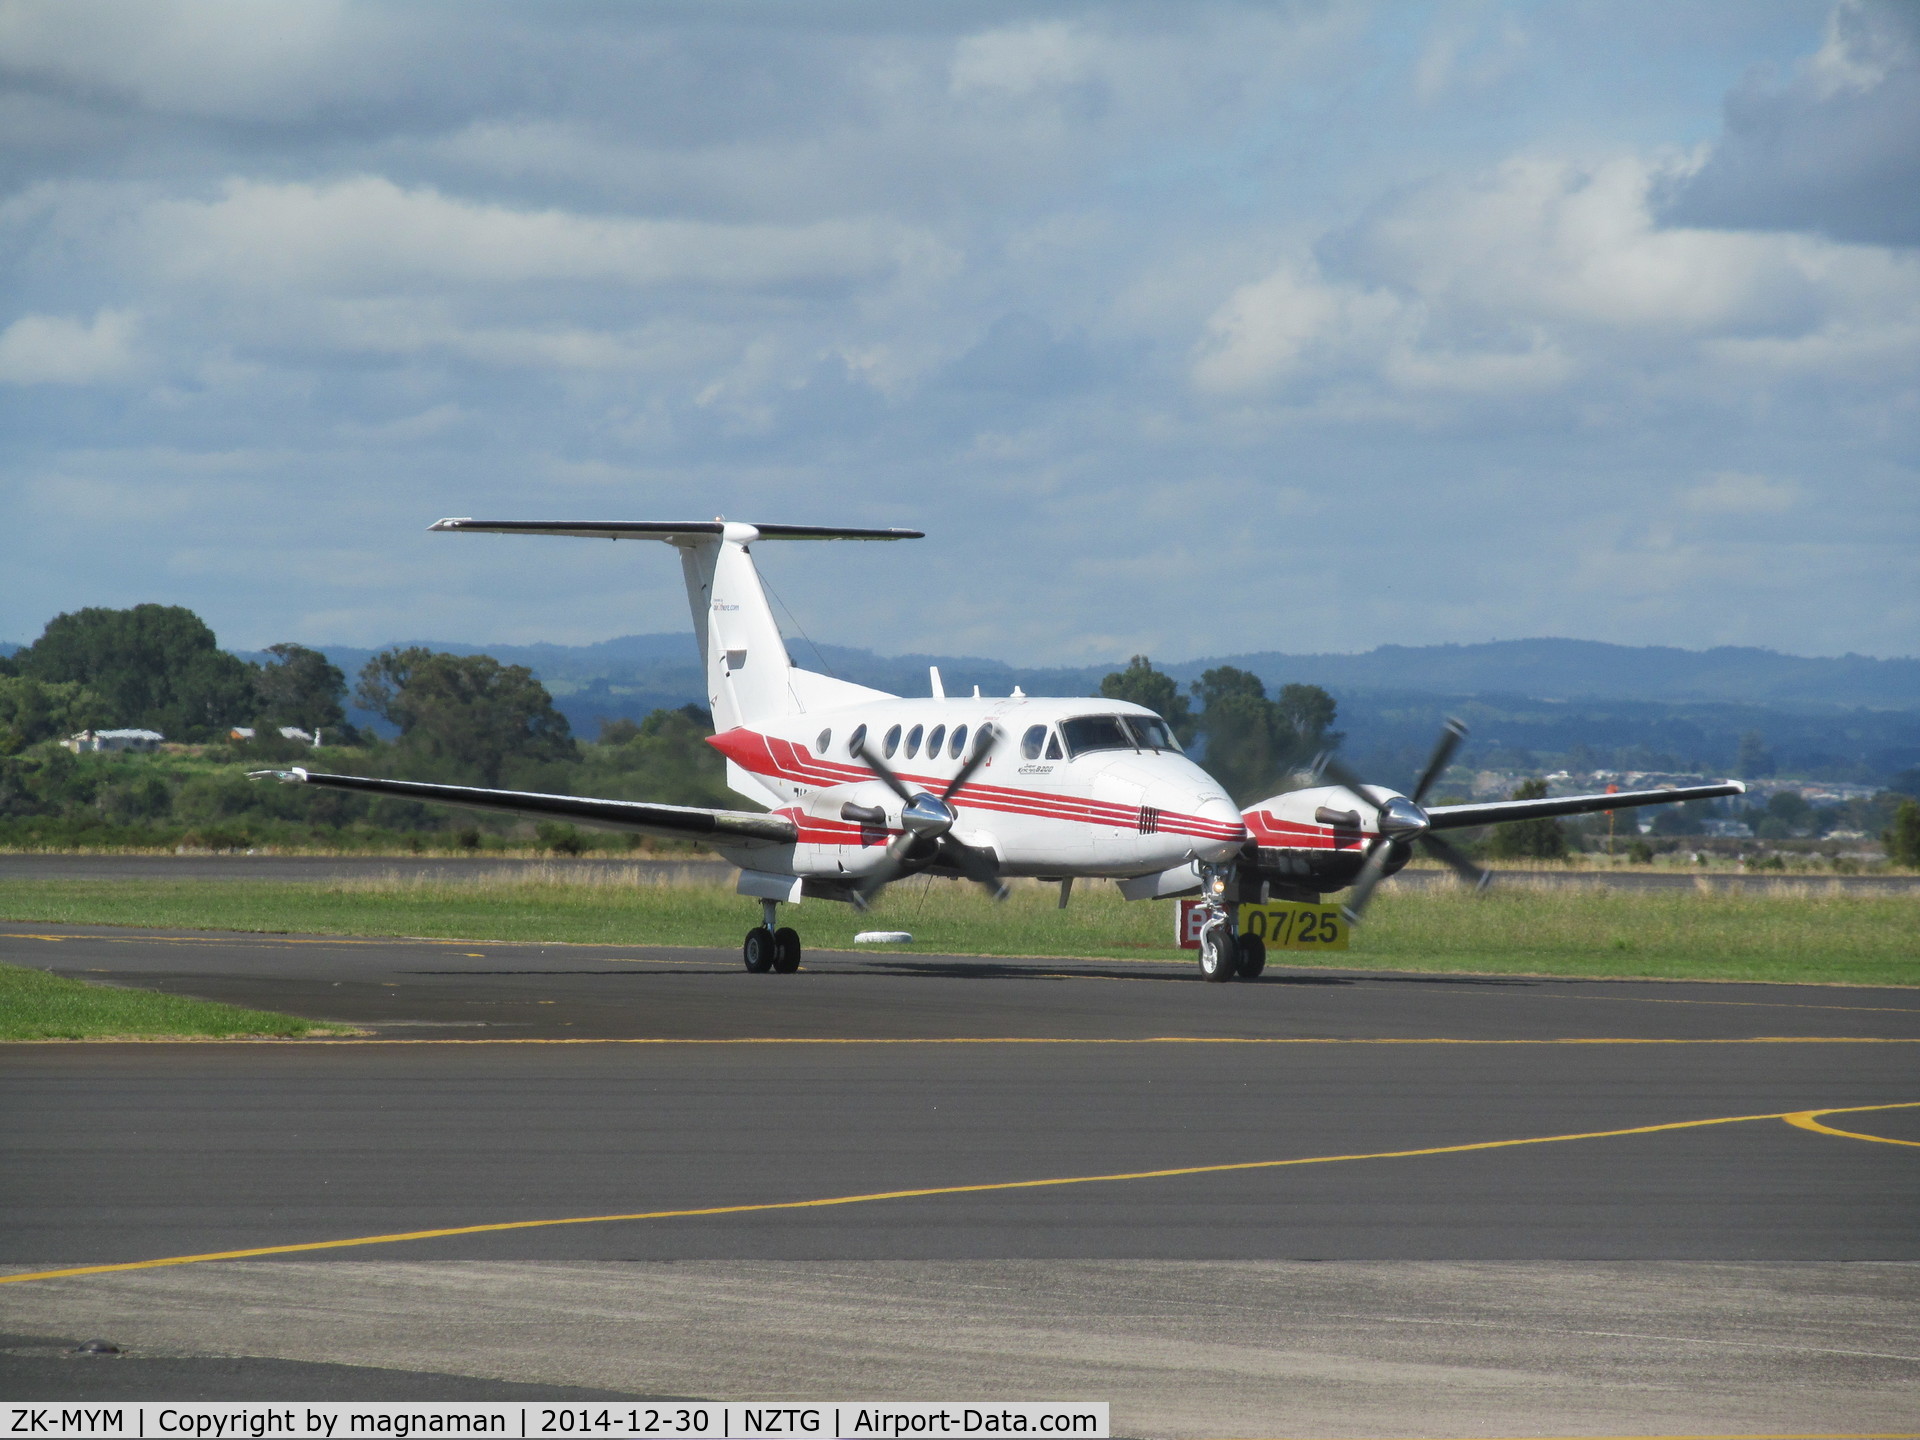 ZK-MYM, 1993 Beech B200 King Air C/N BB-1466, taxying in